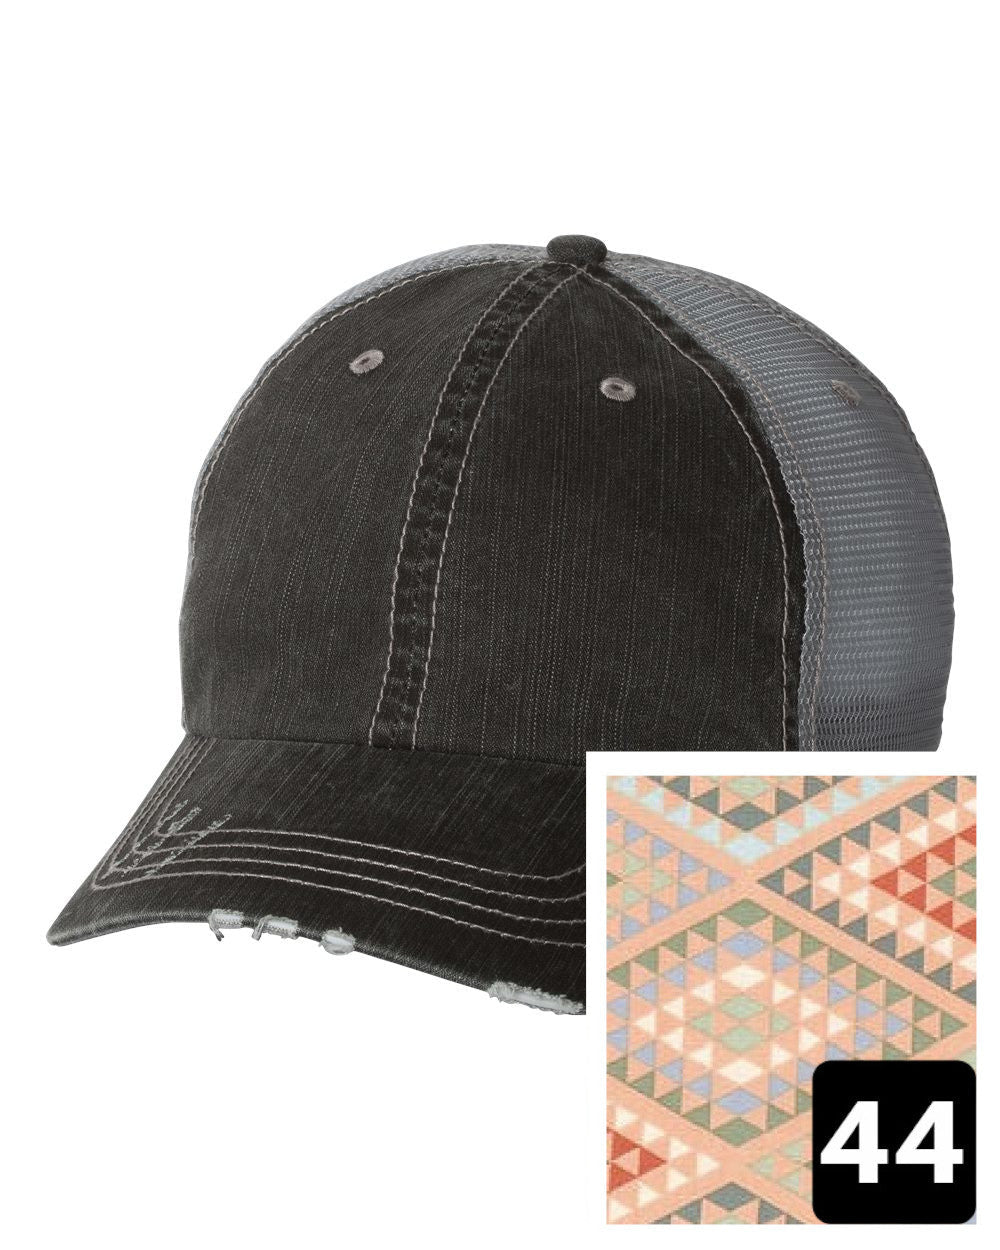 gray distressed trucker hat with navy coral and white chevron fabric state of Washington